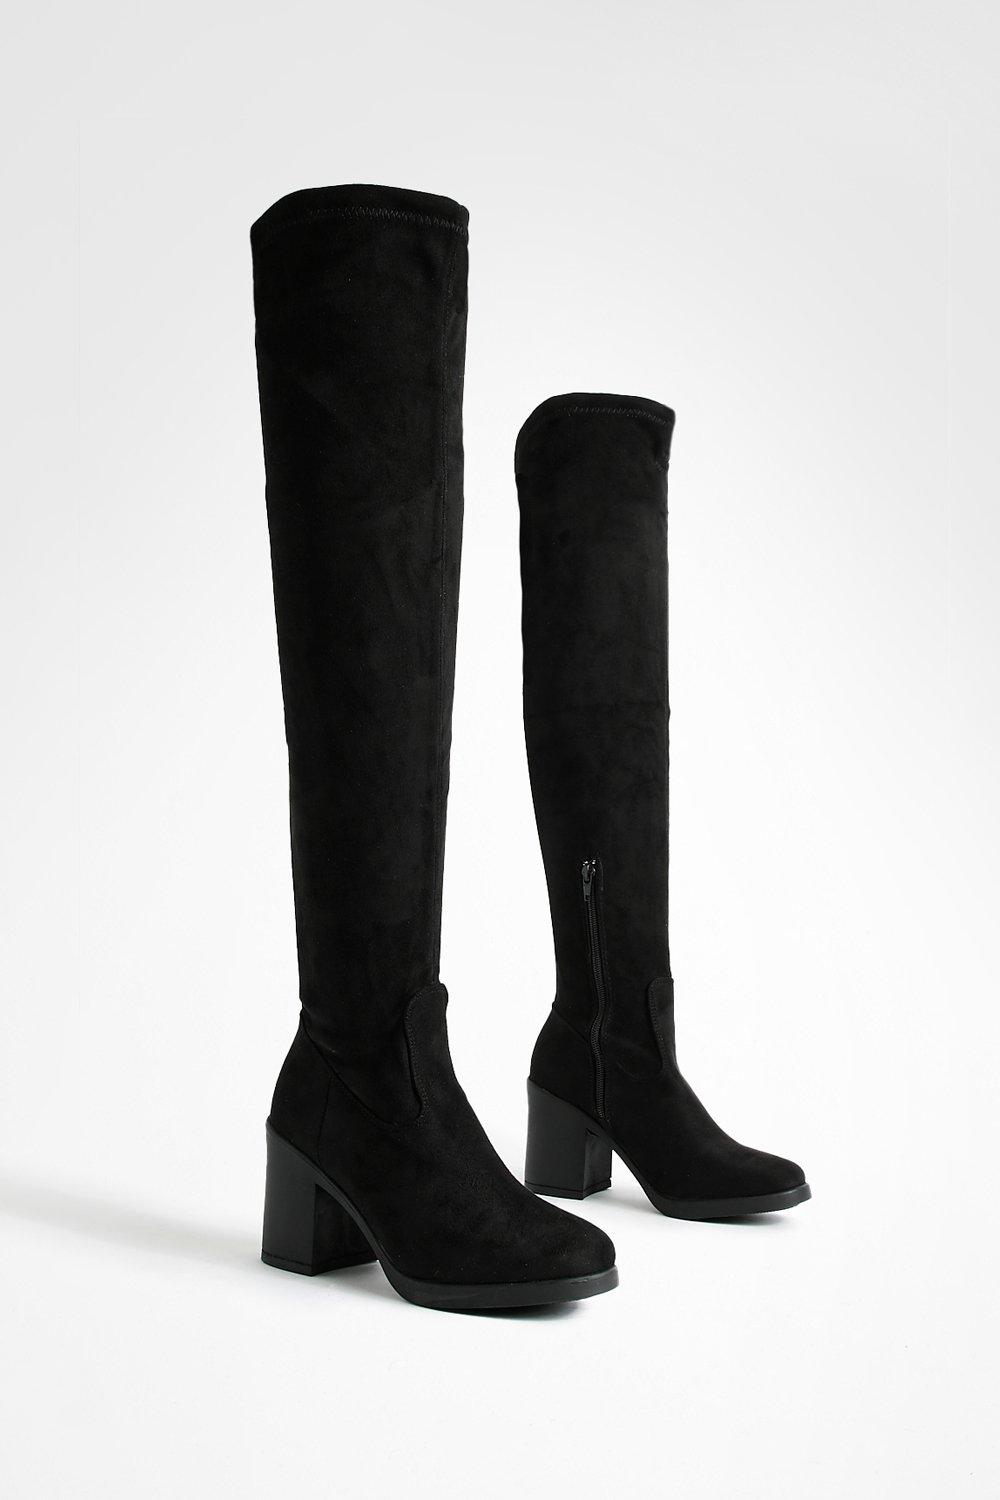 Womens Chunky Over The Knee High Boots - Black - 3, Black